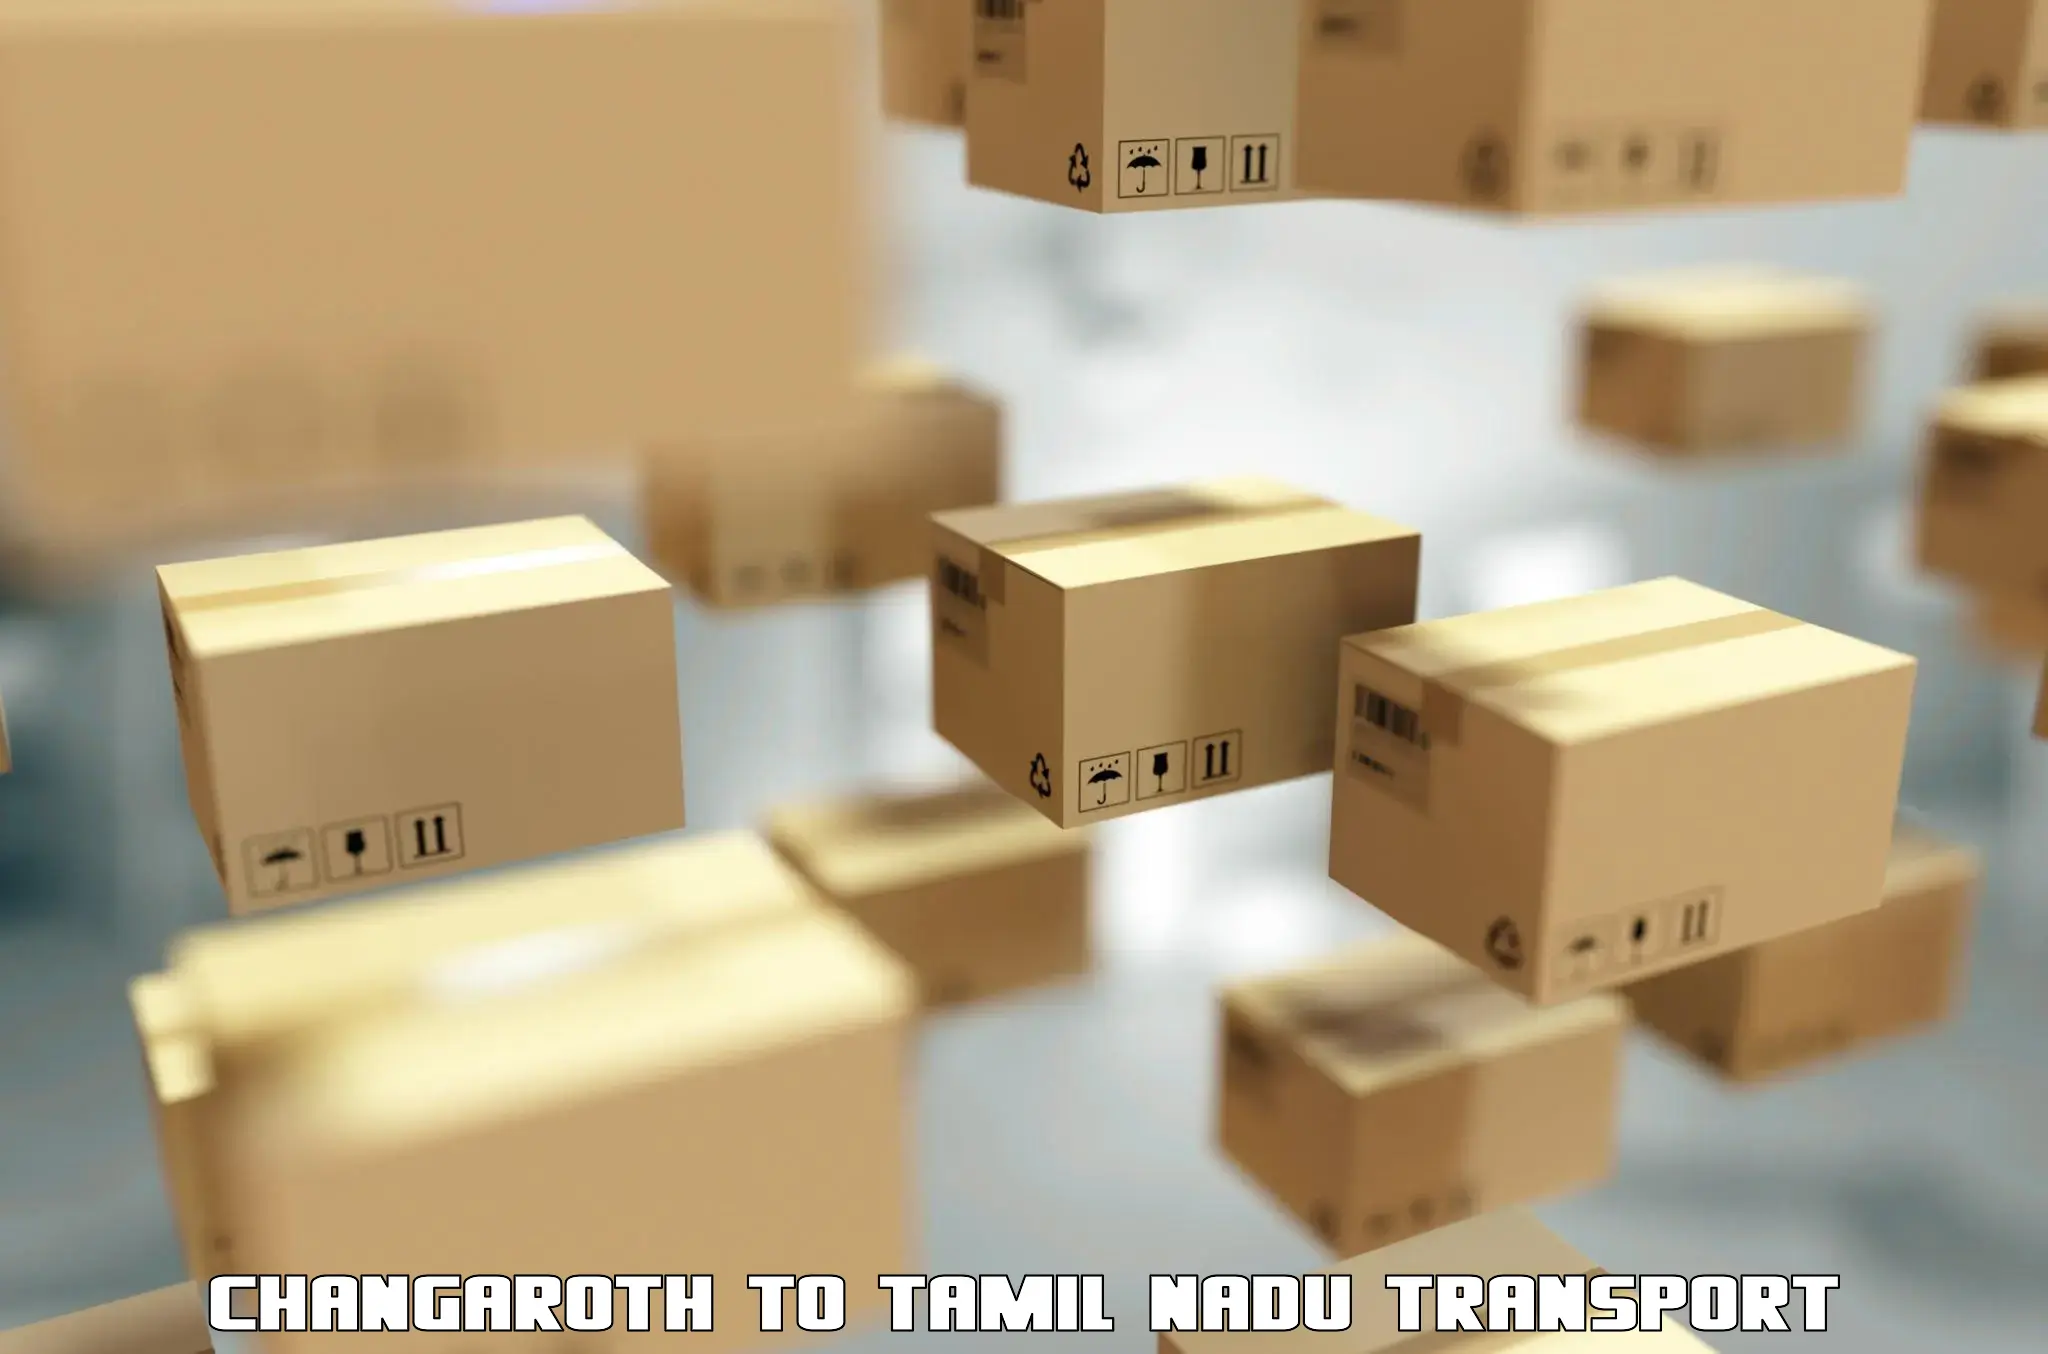 Part load transport service in India Changaroth to Natham